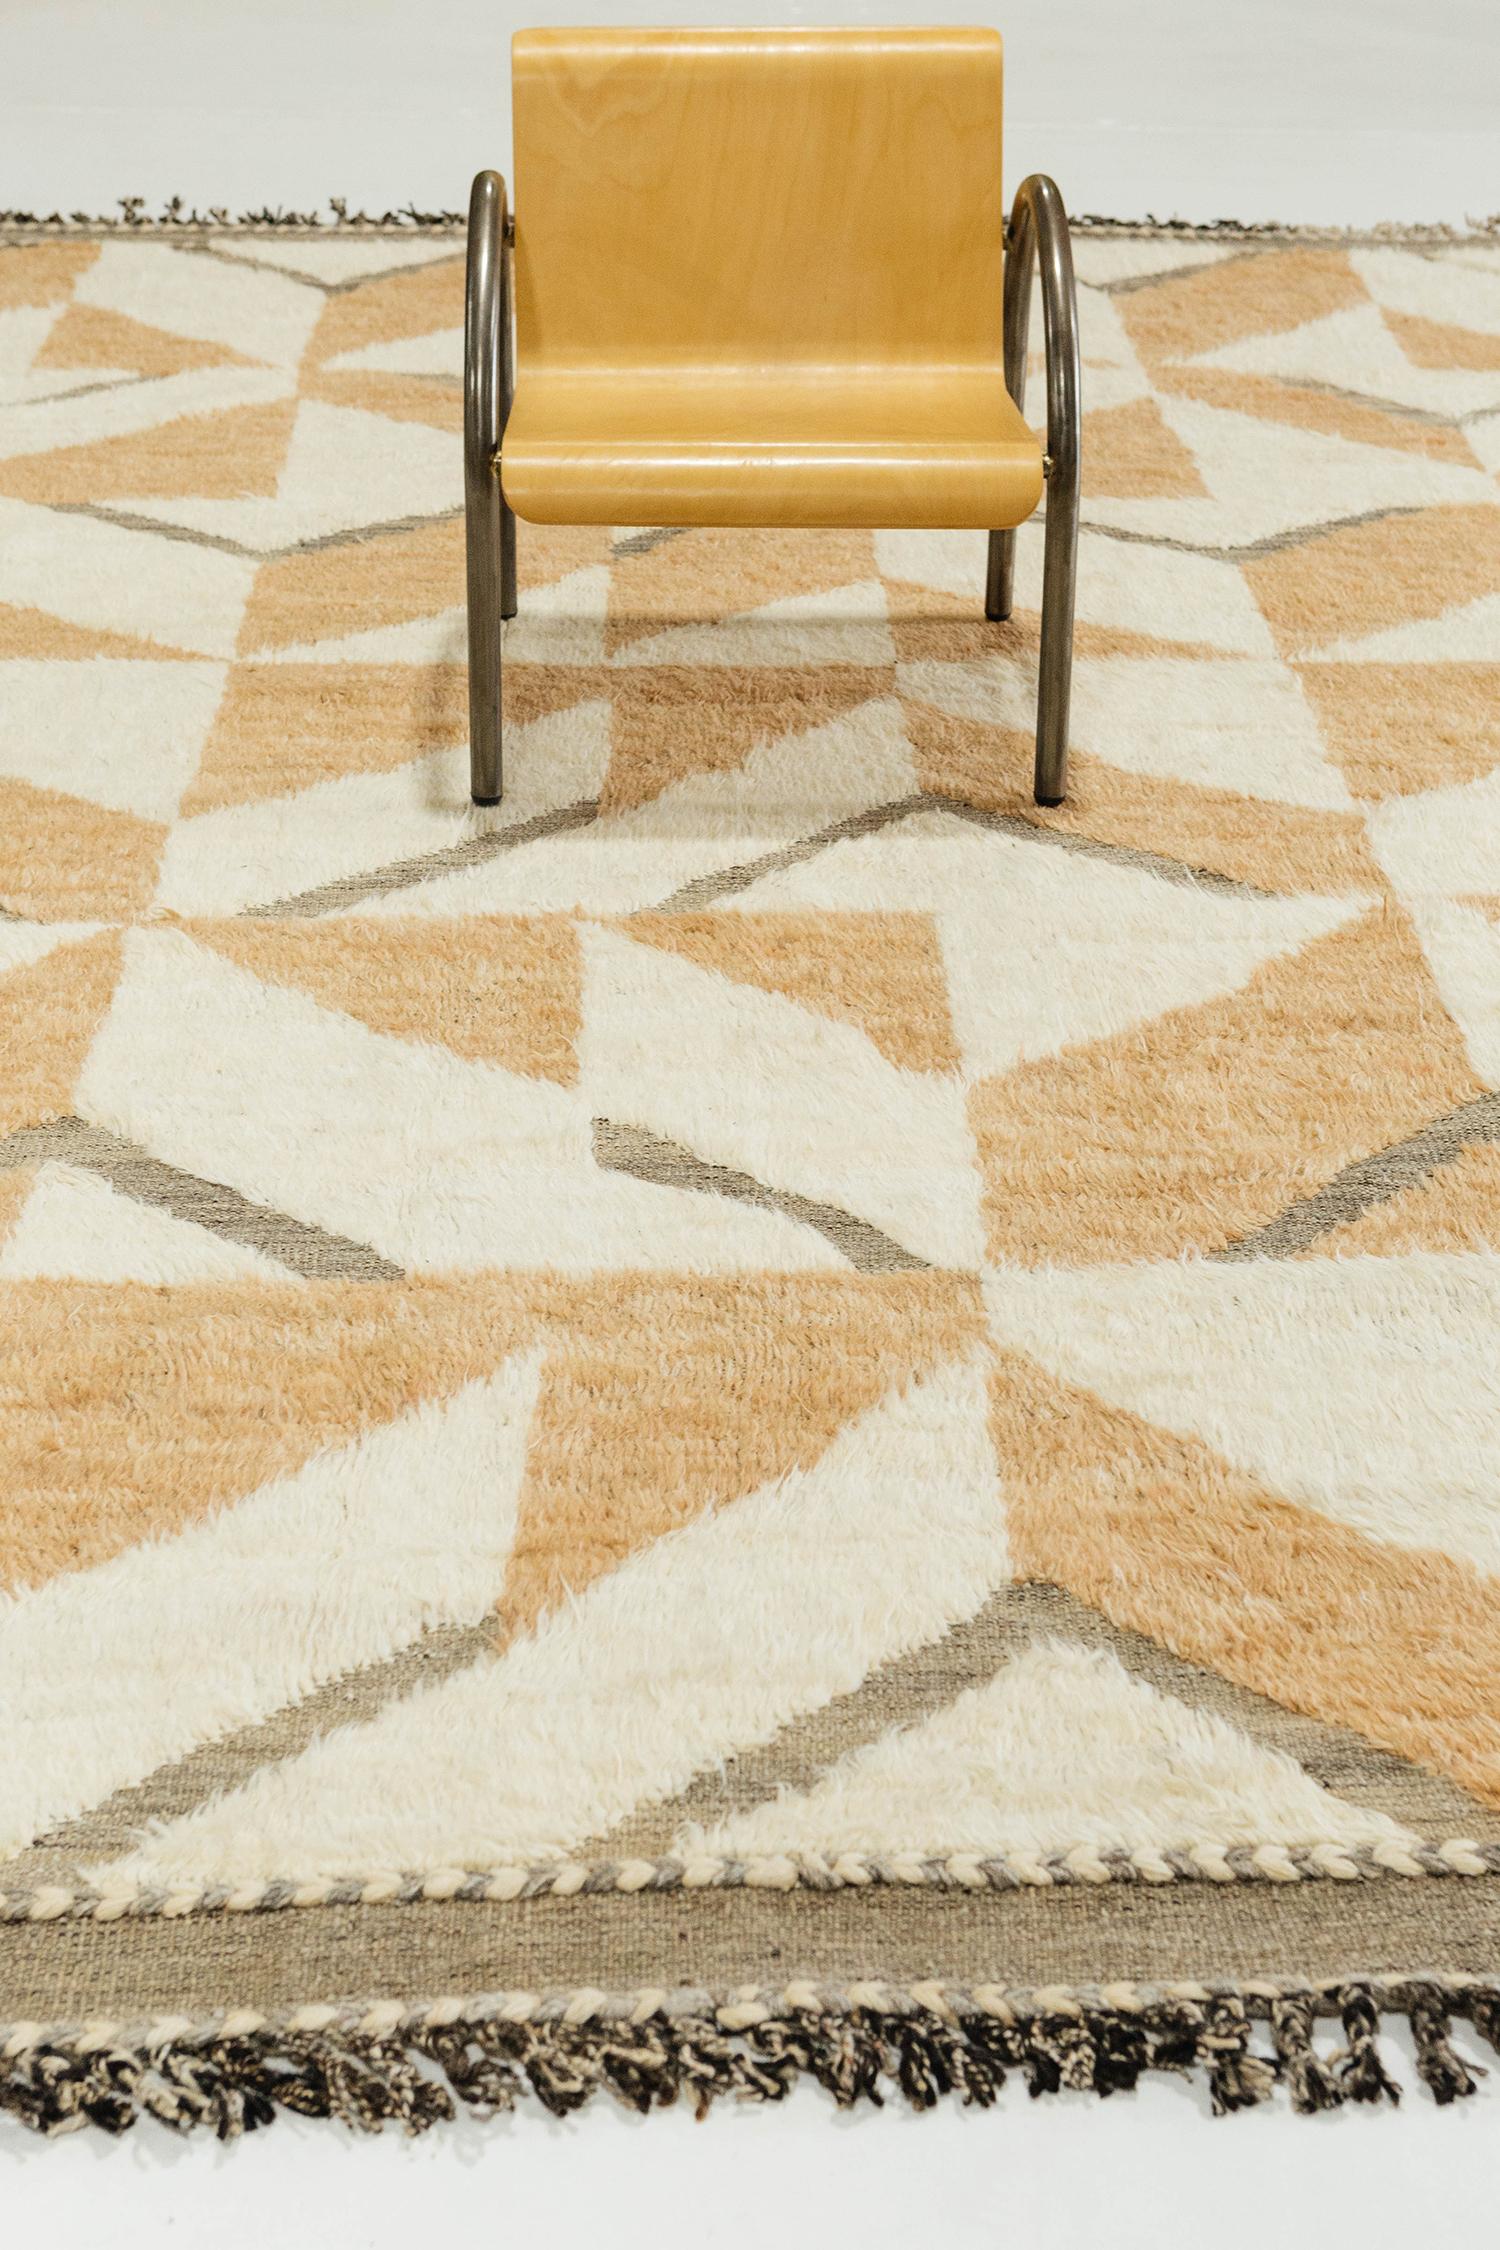 Handwoven of wool, Calcere uses geometric repeating patterns across the border. Peach toned orange and the perfect shade of white make up a short shag surface with a natural earth toned flat weave underlying the embossed detailing.